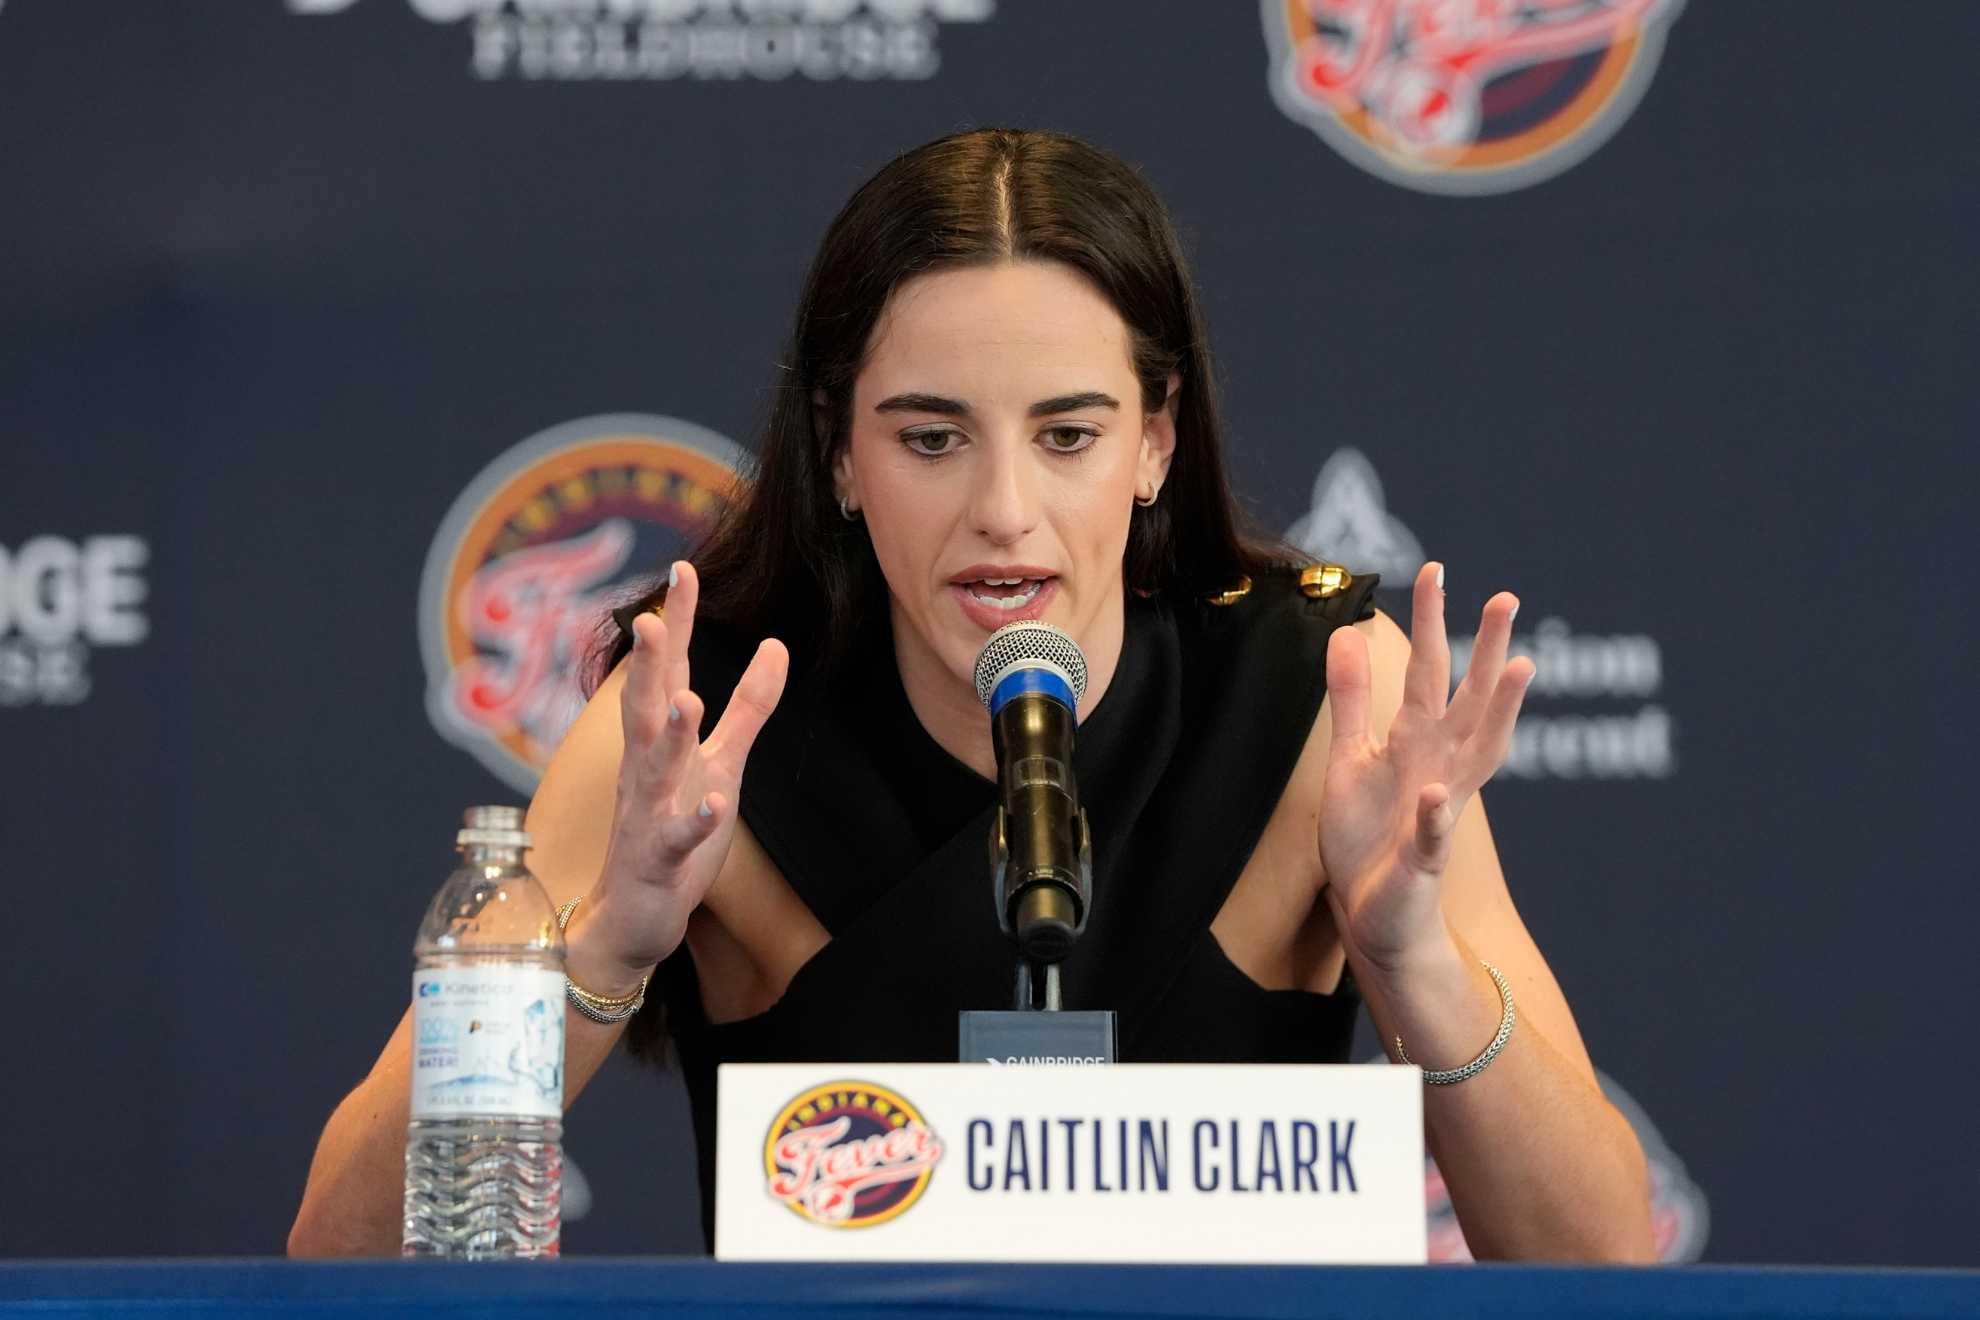 Caitlin Clark at her introductory WNBA press conference.